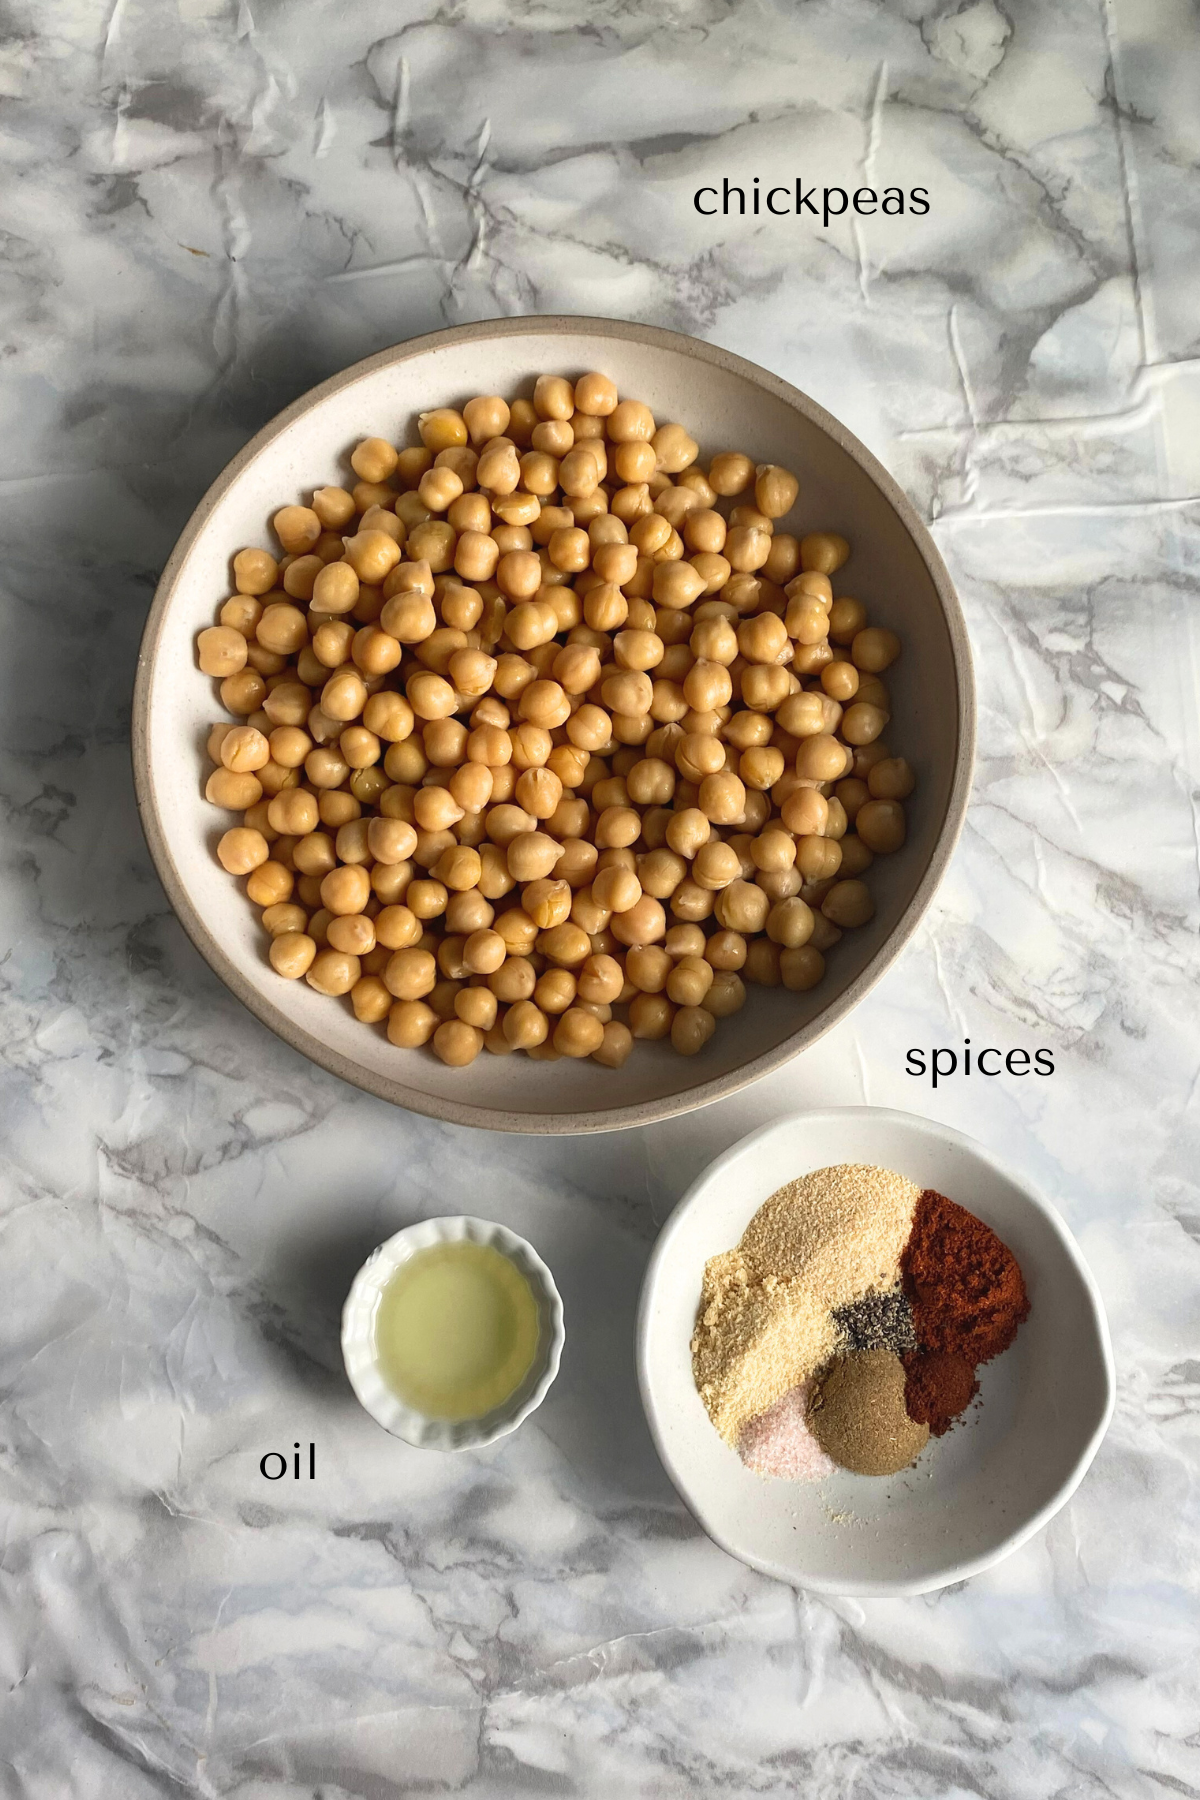 Pan fried chickpeas ingredients with text.